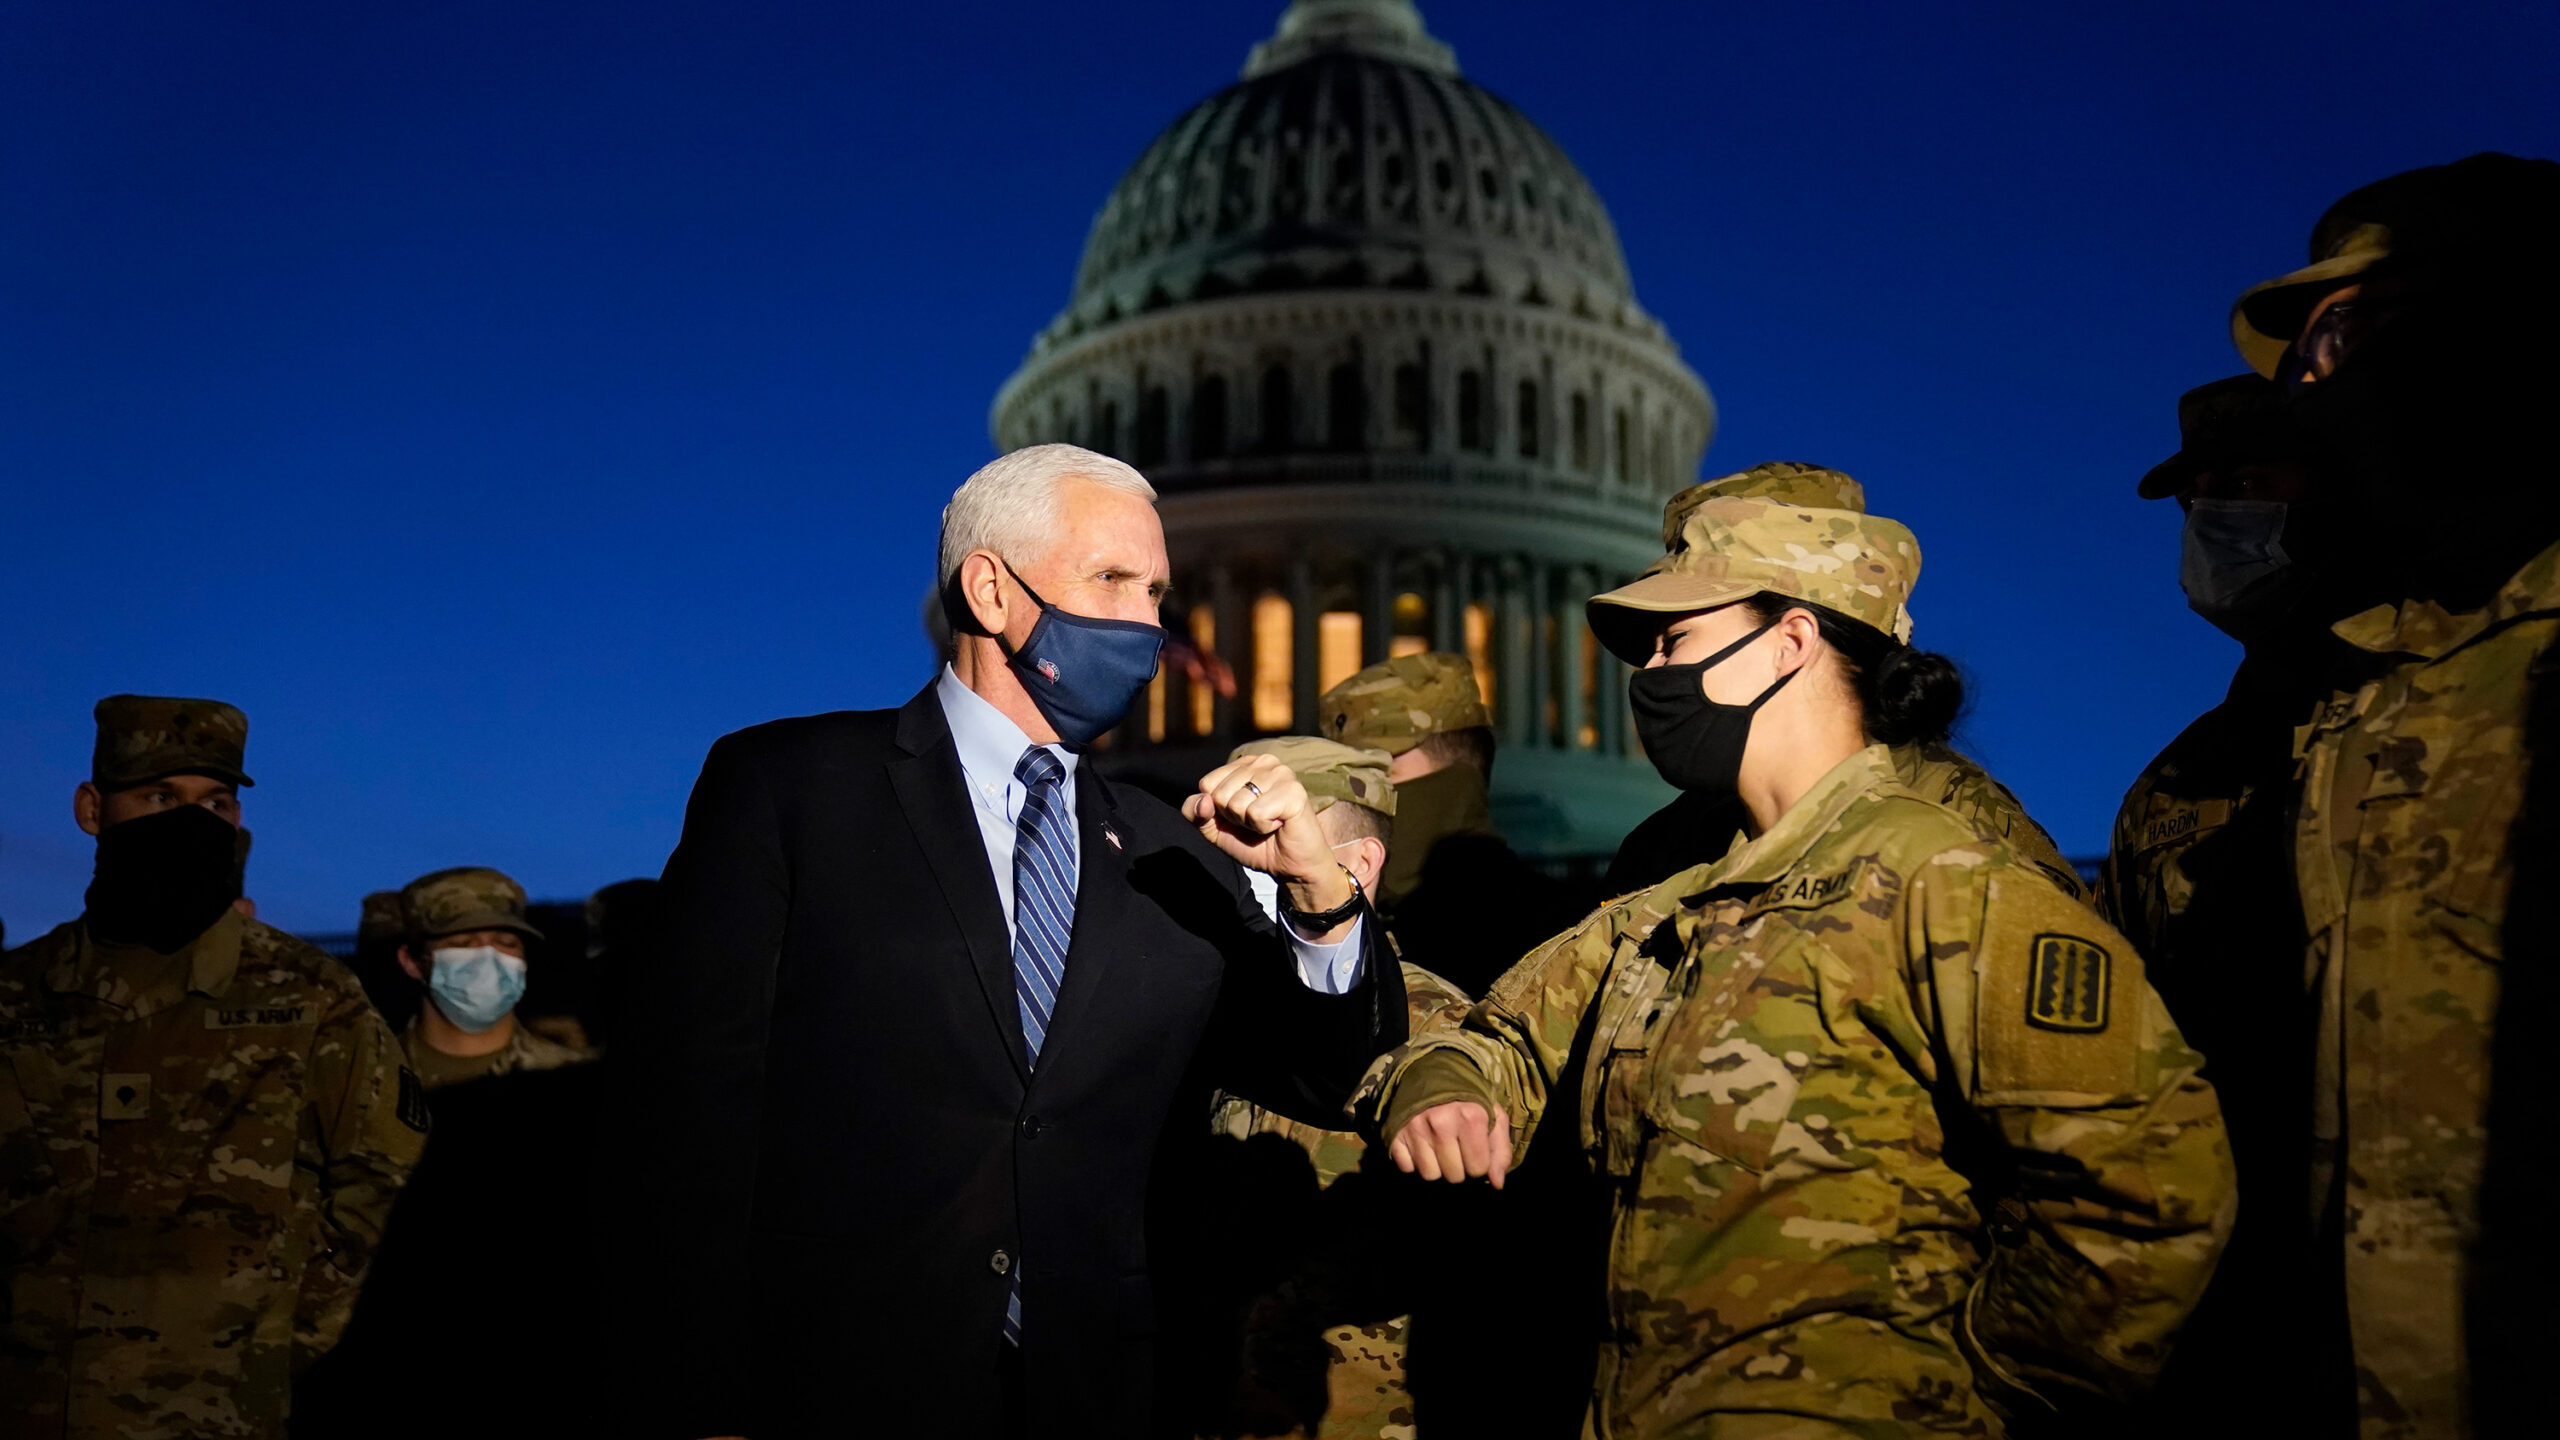 Pence unexpectedly appeared in the United States Congress and instructed the National Guard to ensure the safety of the new president's inauguration.